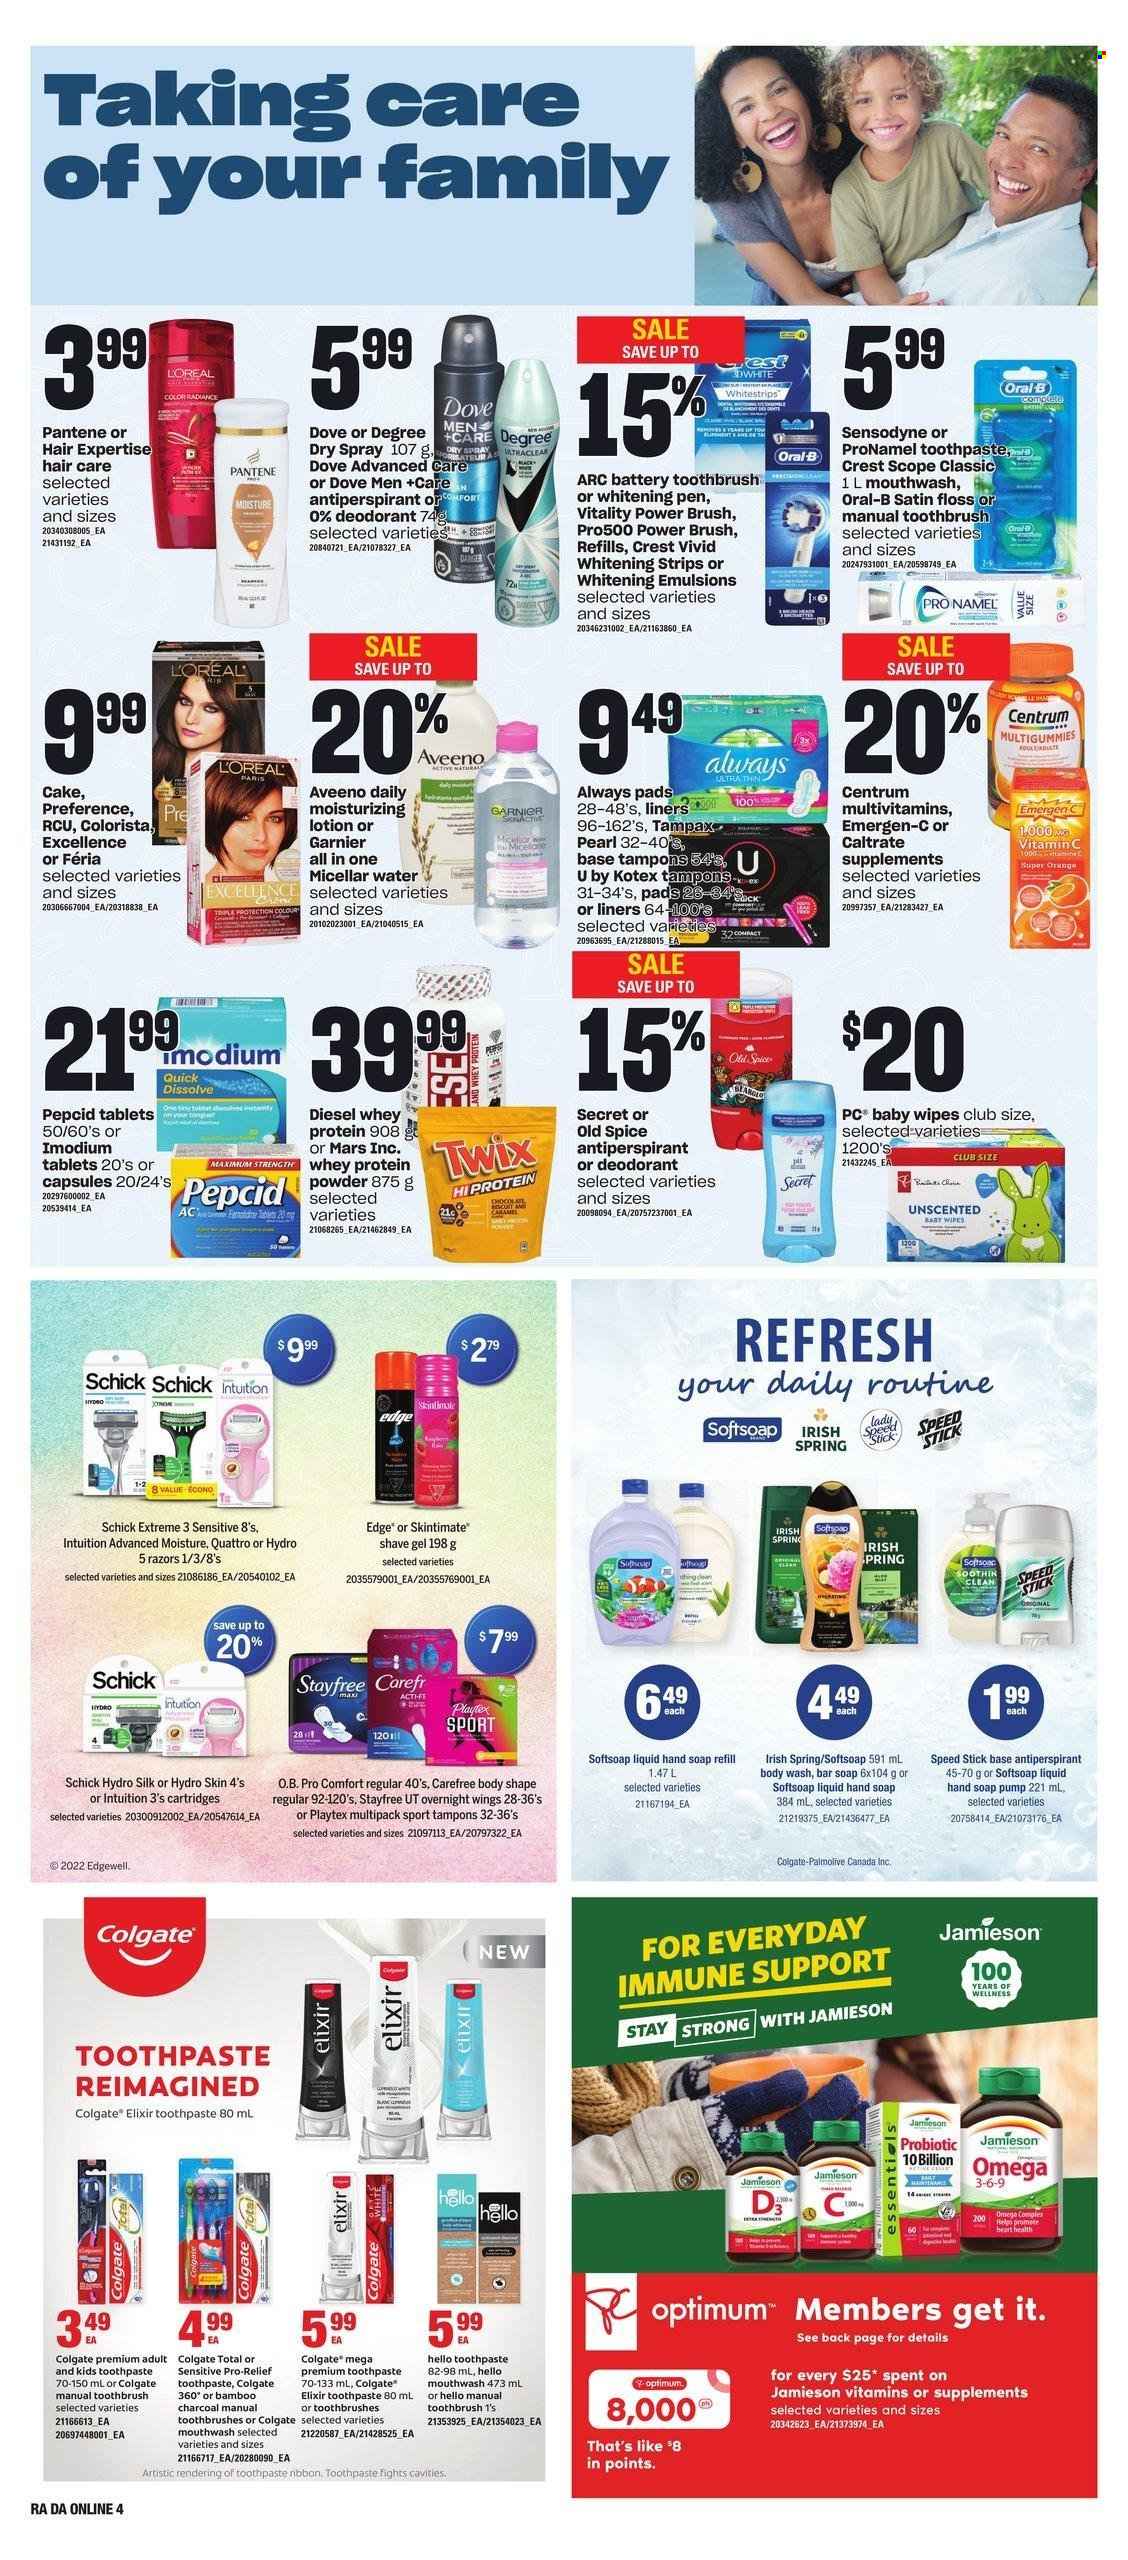 thumbnail - Atlantic Superstore Flyer - January 26, 2023 - February 01, 2023 - Sales products - cake, oranges, Silk, strips, Dove, Twix, Mars, spice, wipes, baby wipes, Aveeno, body wash, Softsoap, hand soap, Palmolive, soap bar, soap, toothbrush, toothpaste, mouthwash, Crest, Stayfree, Playtex, Always pads, Carefree, Kotex, tampons, L’Oréal, micellar water, Pantene, body lotion, anti-perspirant, Speed Stick, shave gel, Schick, Optimum, multivitamin, vitamin c, Pepcid, Omega-3, Emergen-C, whey protein, Centrum, Colgate, Garnier, Tampax, Imodium, Old Spice, Oral-B, Sensodyne, deodorant. Page 12.